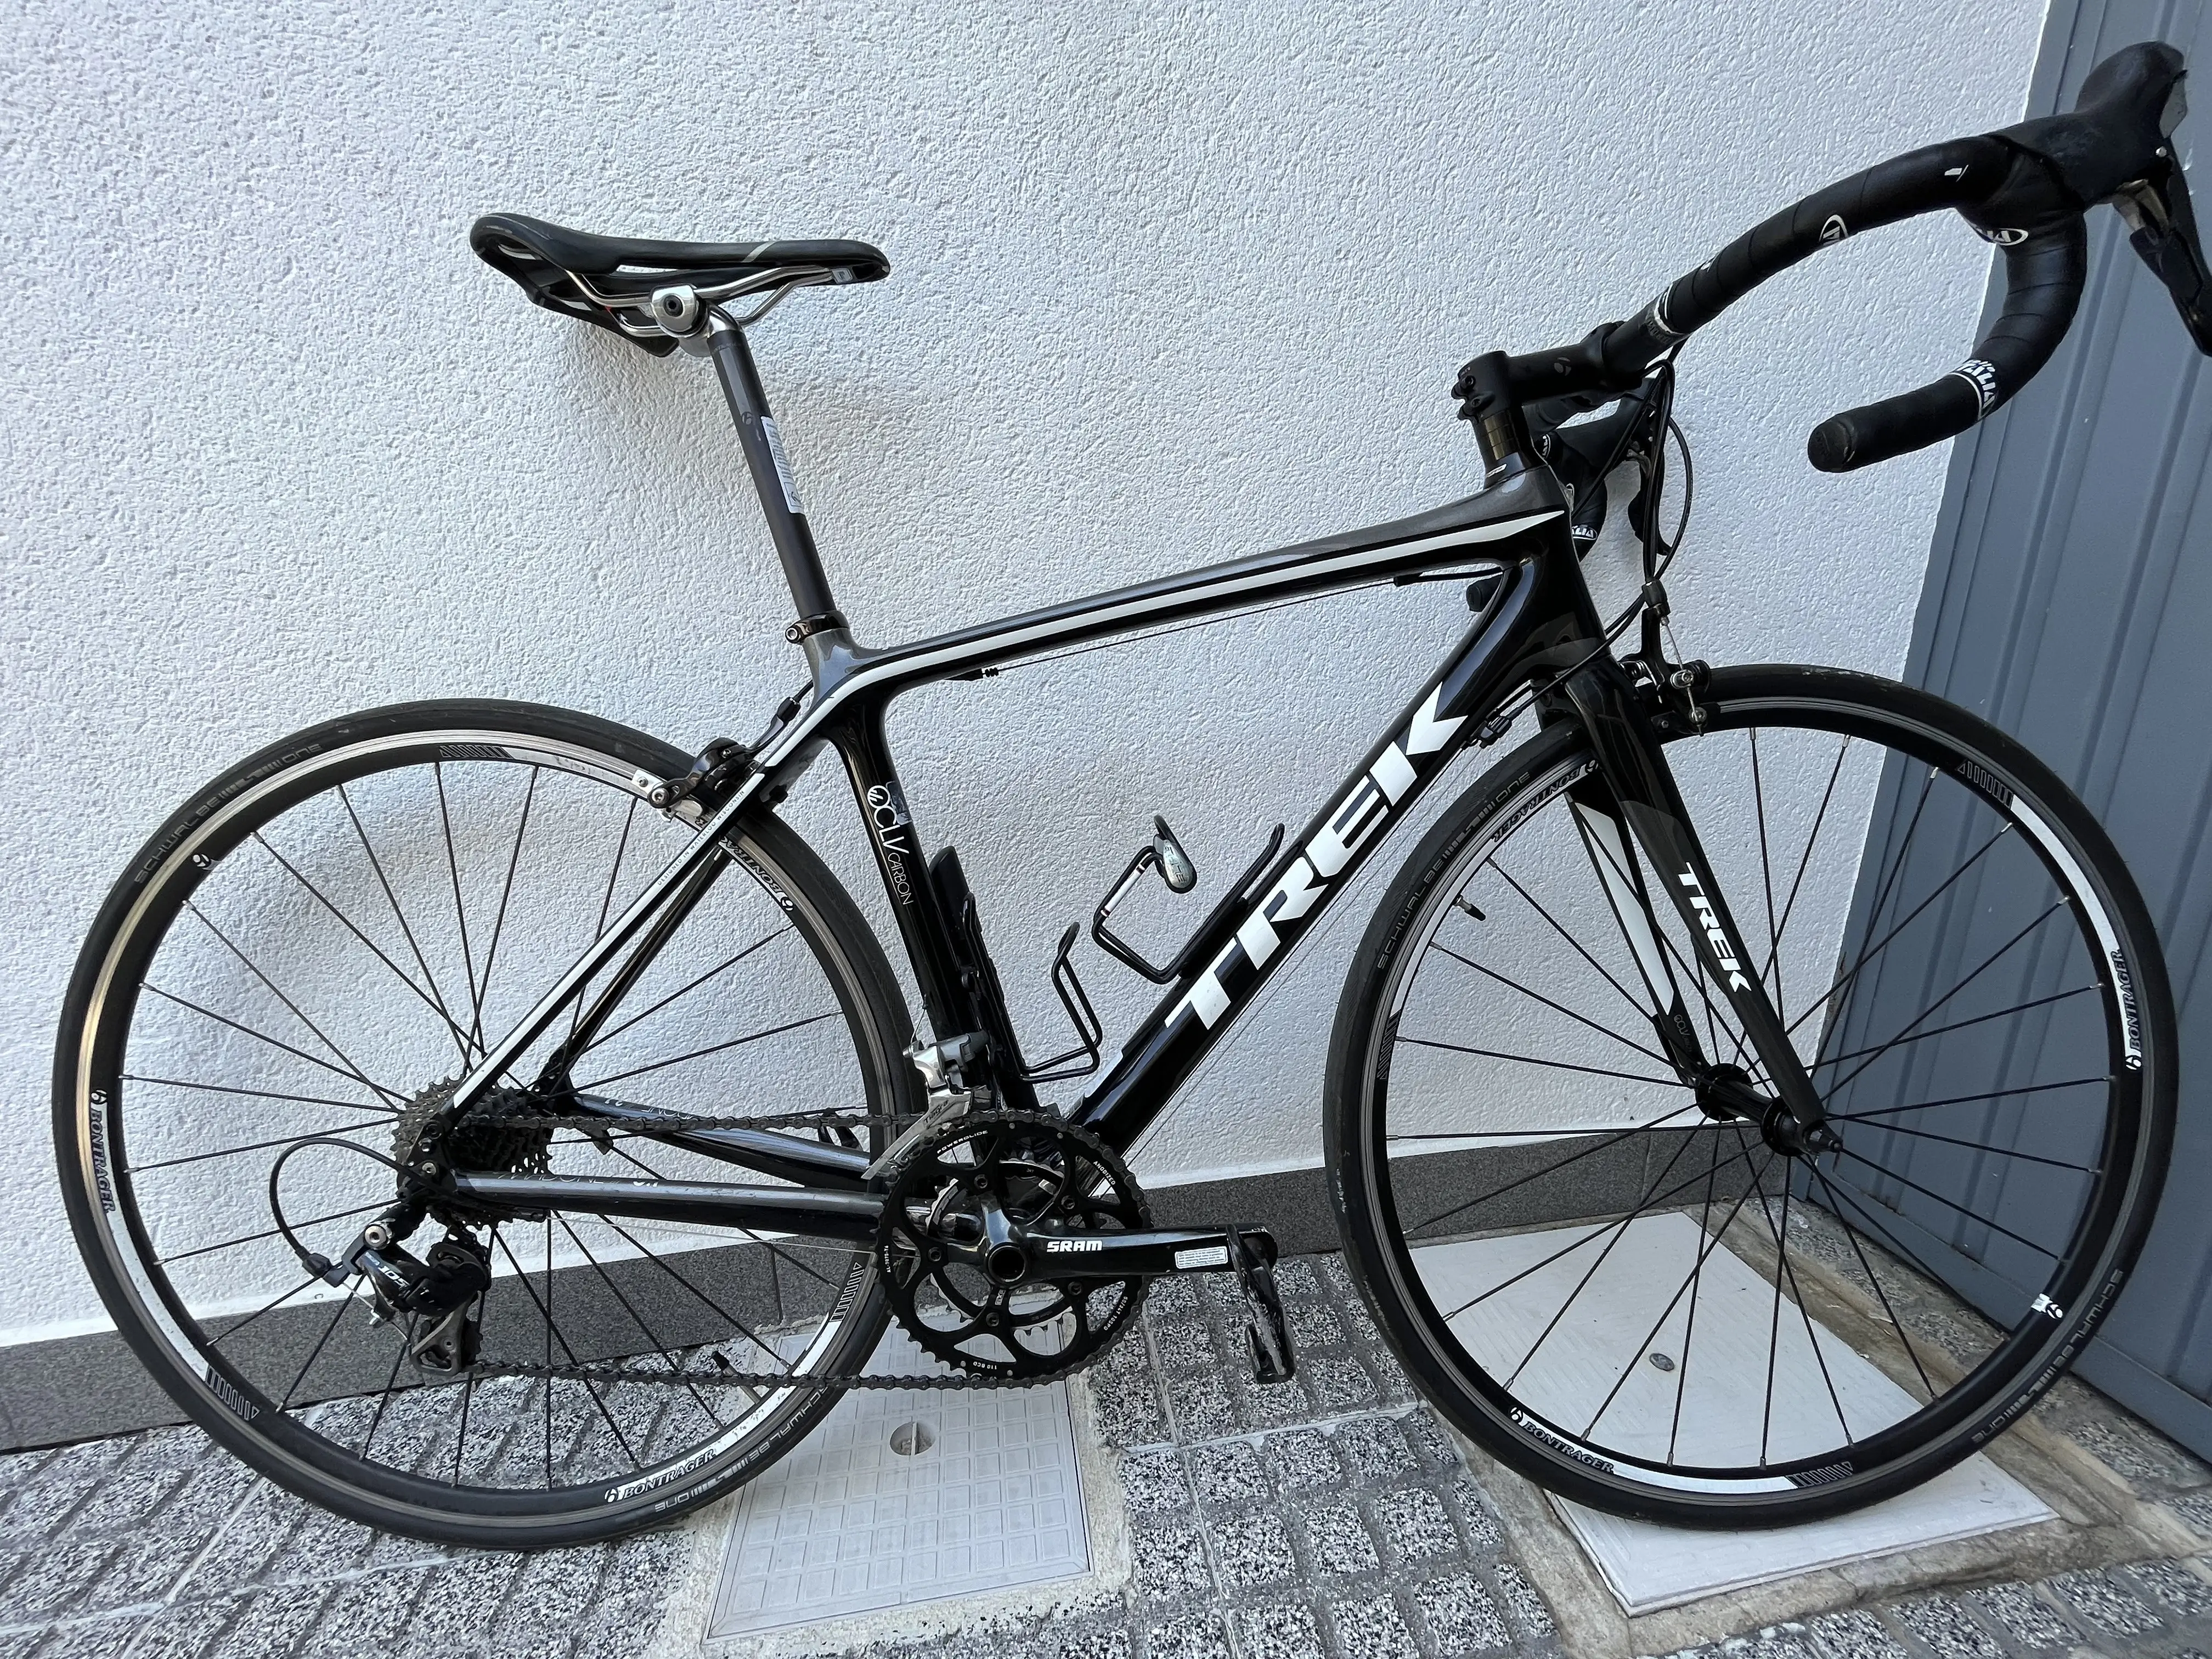 Trek Madone 3.1 H2 Compact used in 52 cm | buycycle